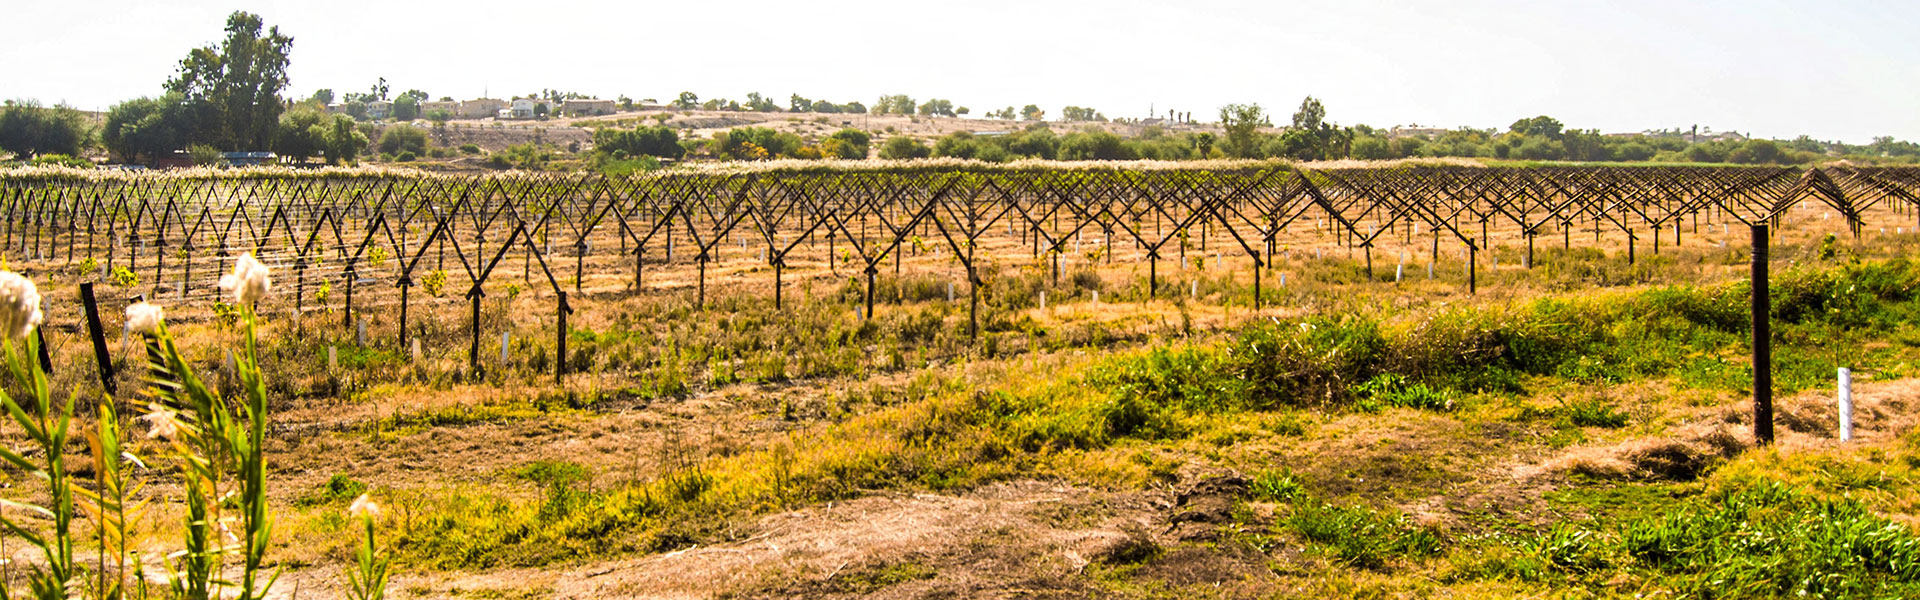 SL-Pic-07: Lemoendraai Agricultural Cooperative: Production of Lucerne, Colombar & Chenin Blanc Grapes in Northern Cape